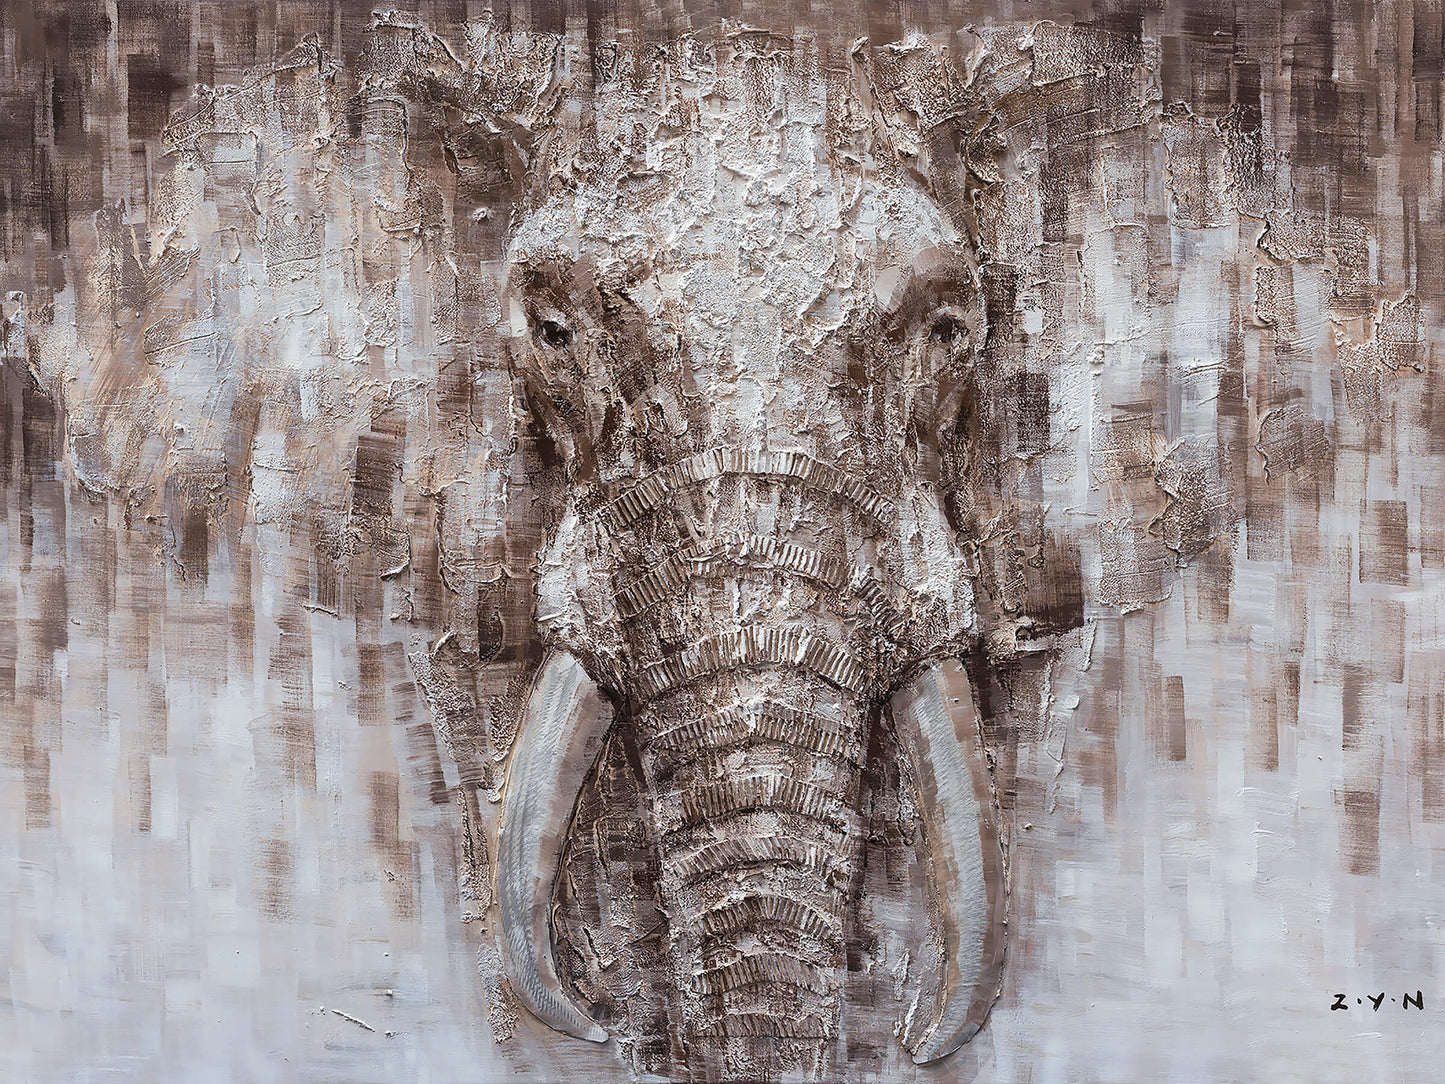 "An Elephant's Tusk Oil Painting" Hand Painted on Wrapped Canvas